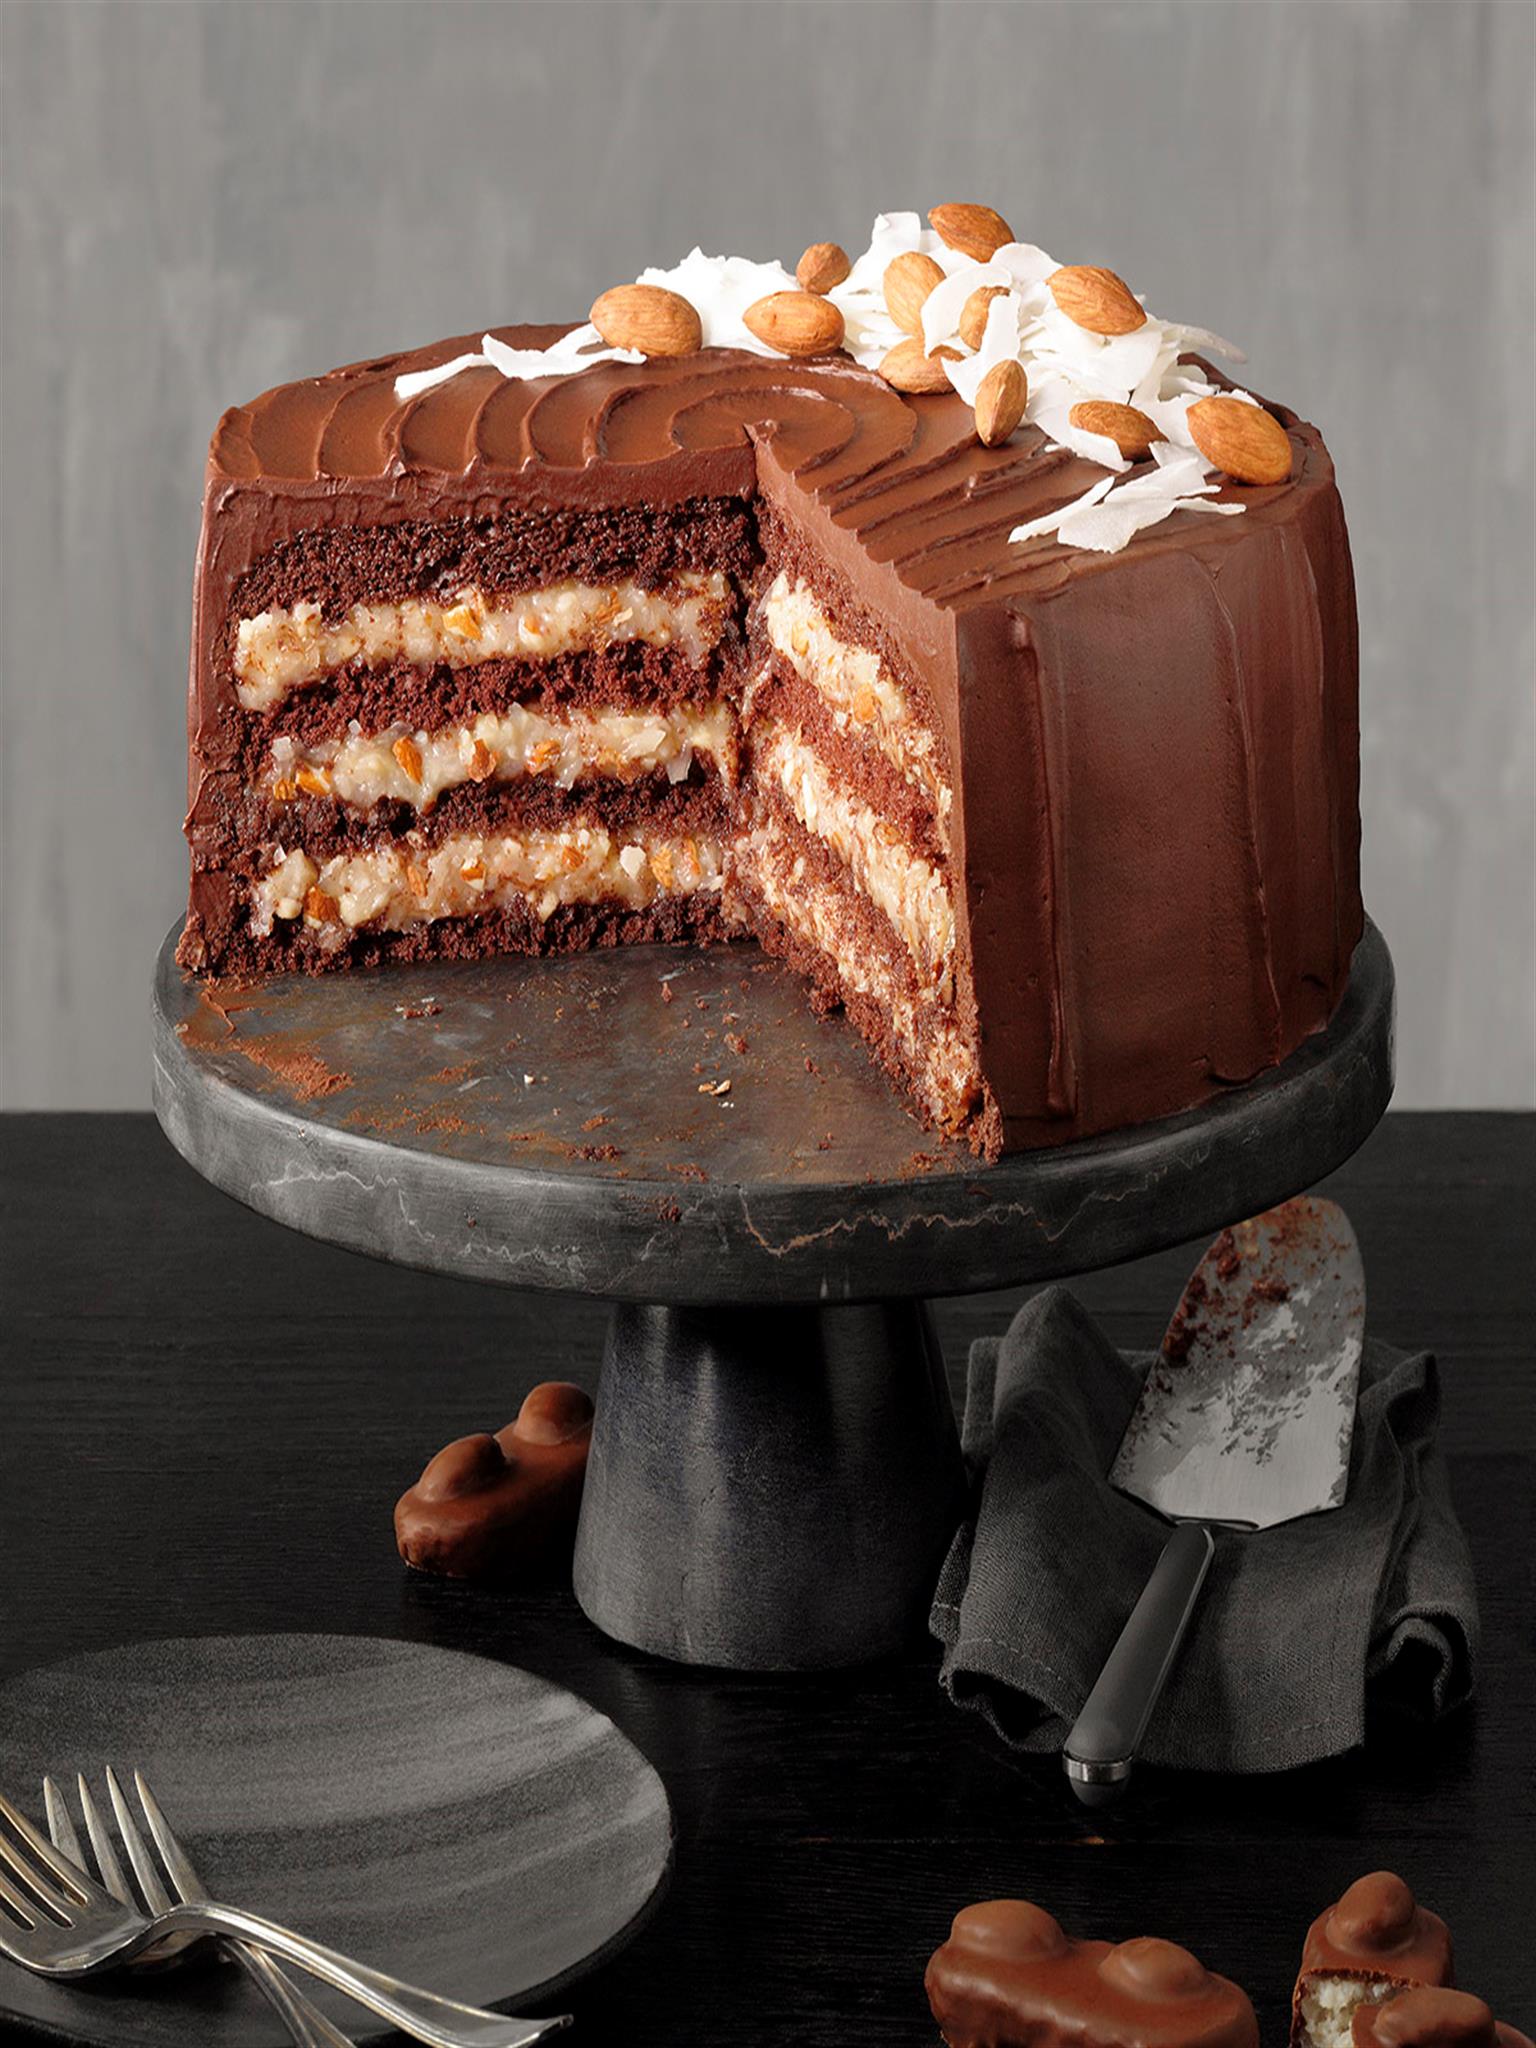 Bounty chocolate cake with caramel filling